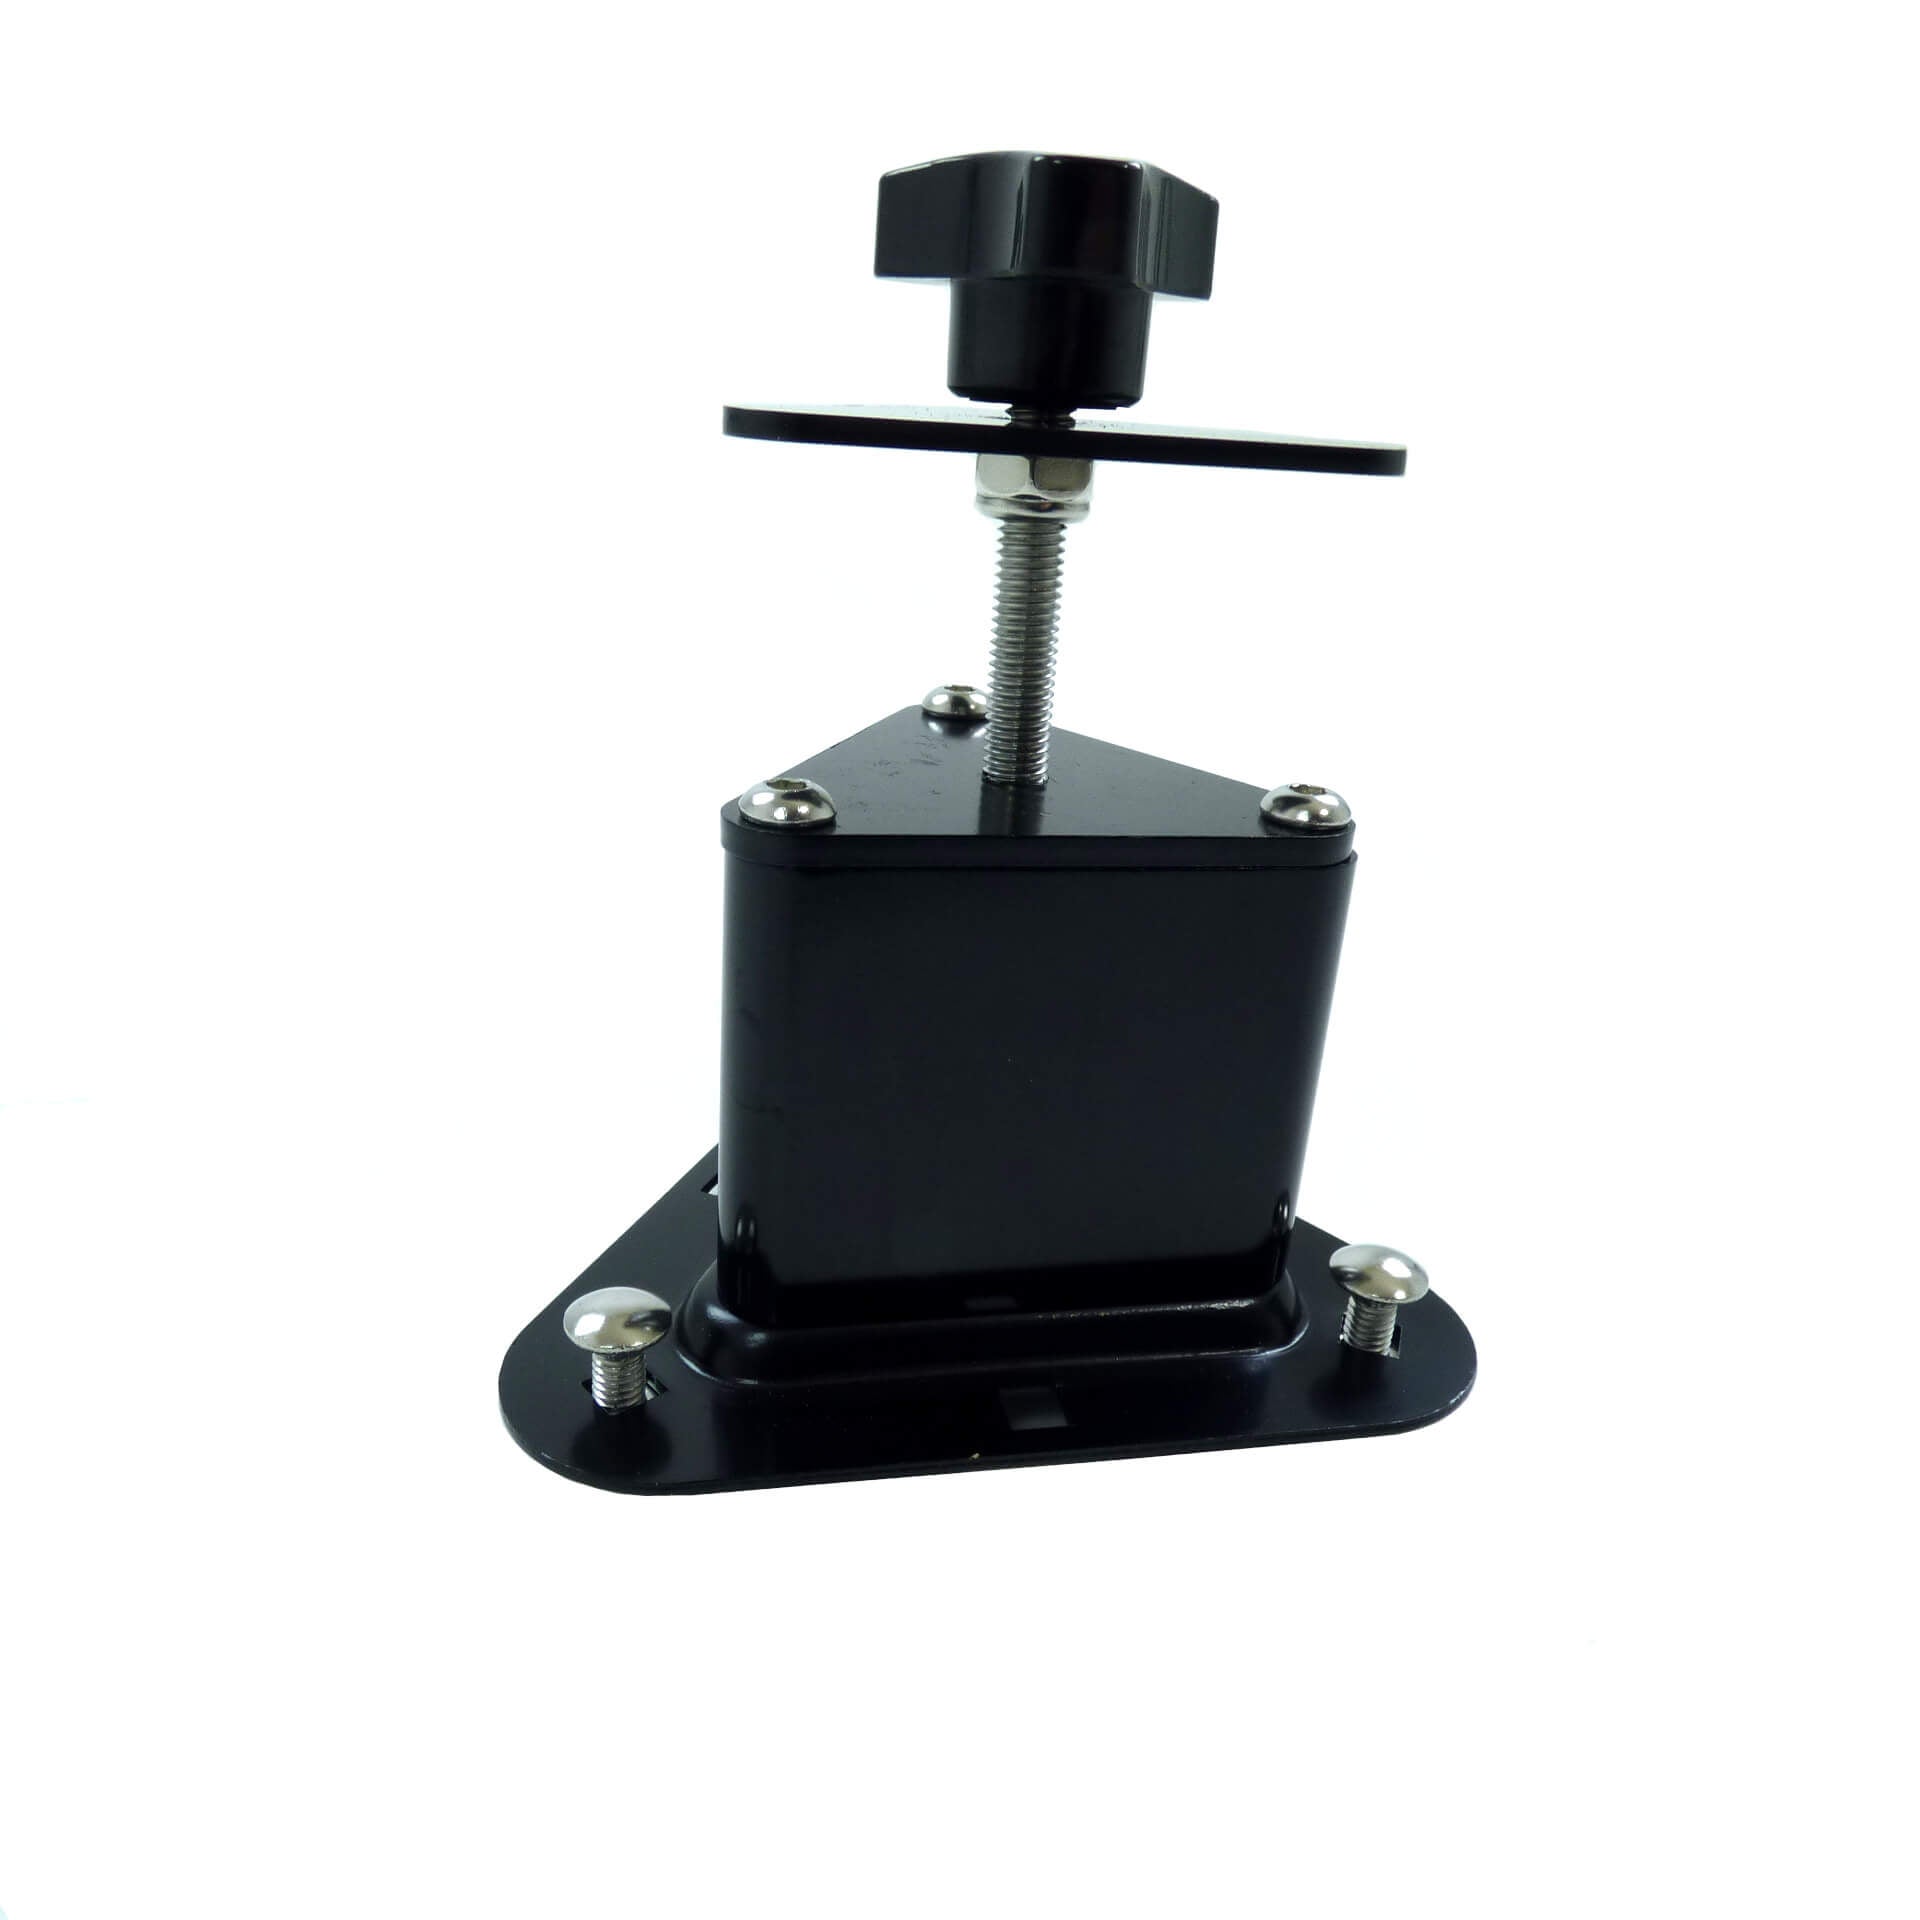 Mounting Clamp Bracket for High Capacity Jerry Cans -  - sold by Direct4x4